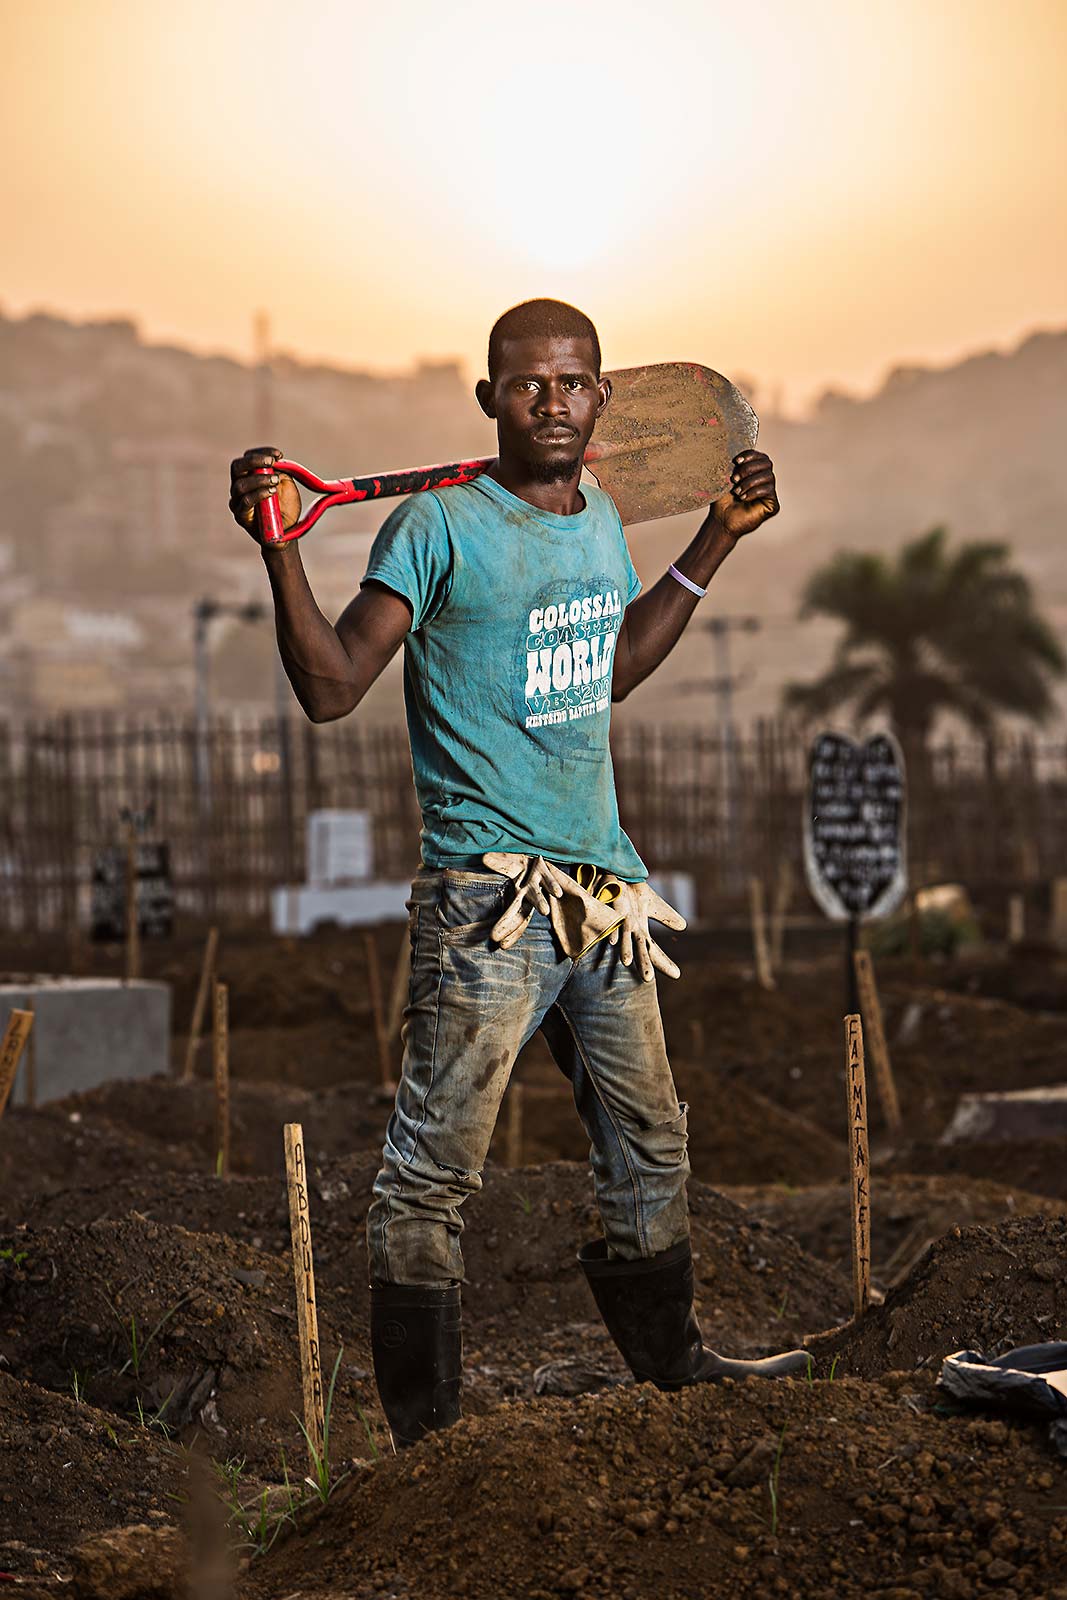 A black male worker at an Ebola graveyard at sunset in Freetown Sierra Leone